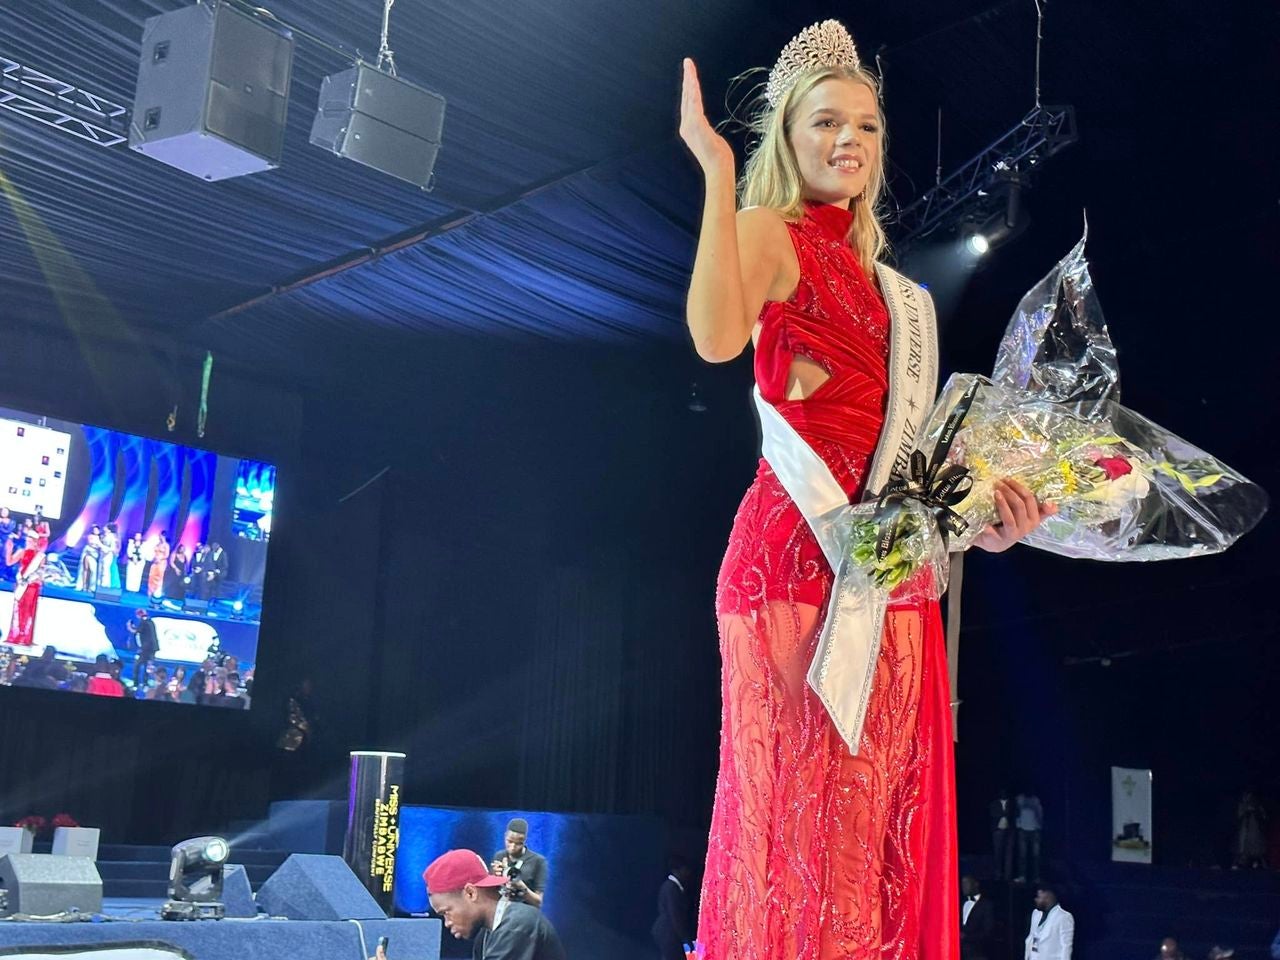 White Woman Wins Miss Universe Zimbabwe Crown,Sparks Heated Online